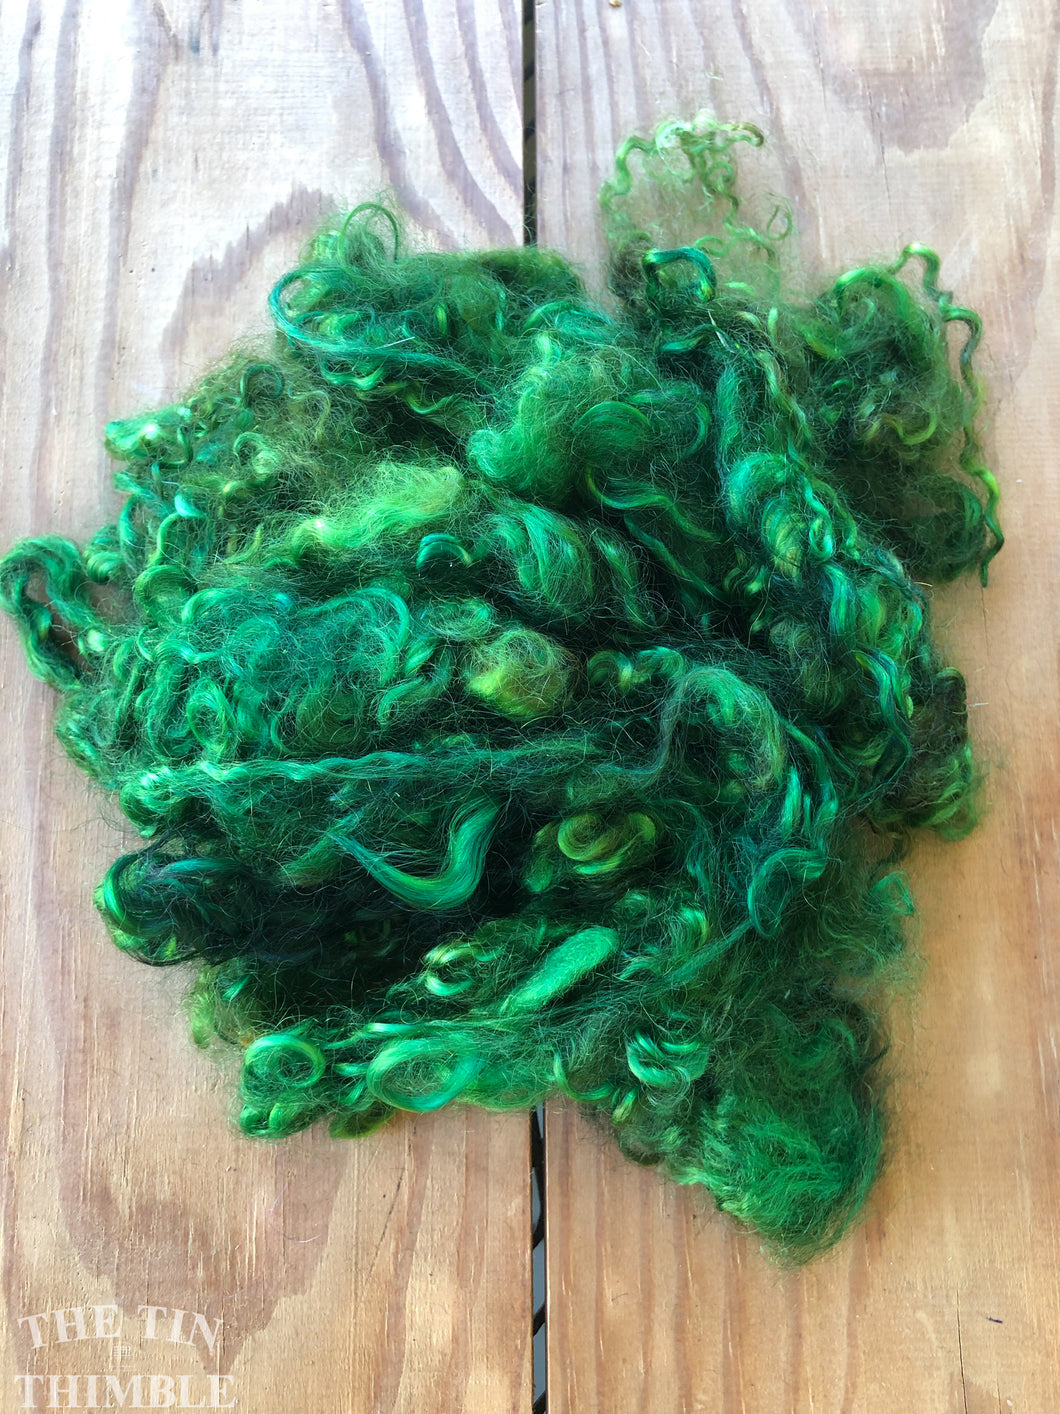 Mohair Locks for Felting, Spinning or Weaving - 1/4 Oz - Hand Dyed in the Color 'Emerald'